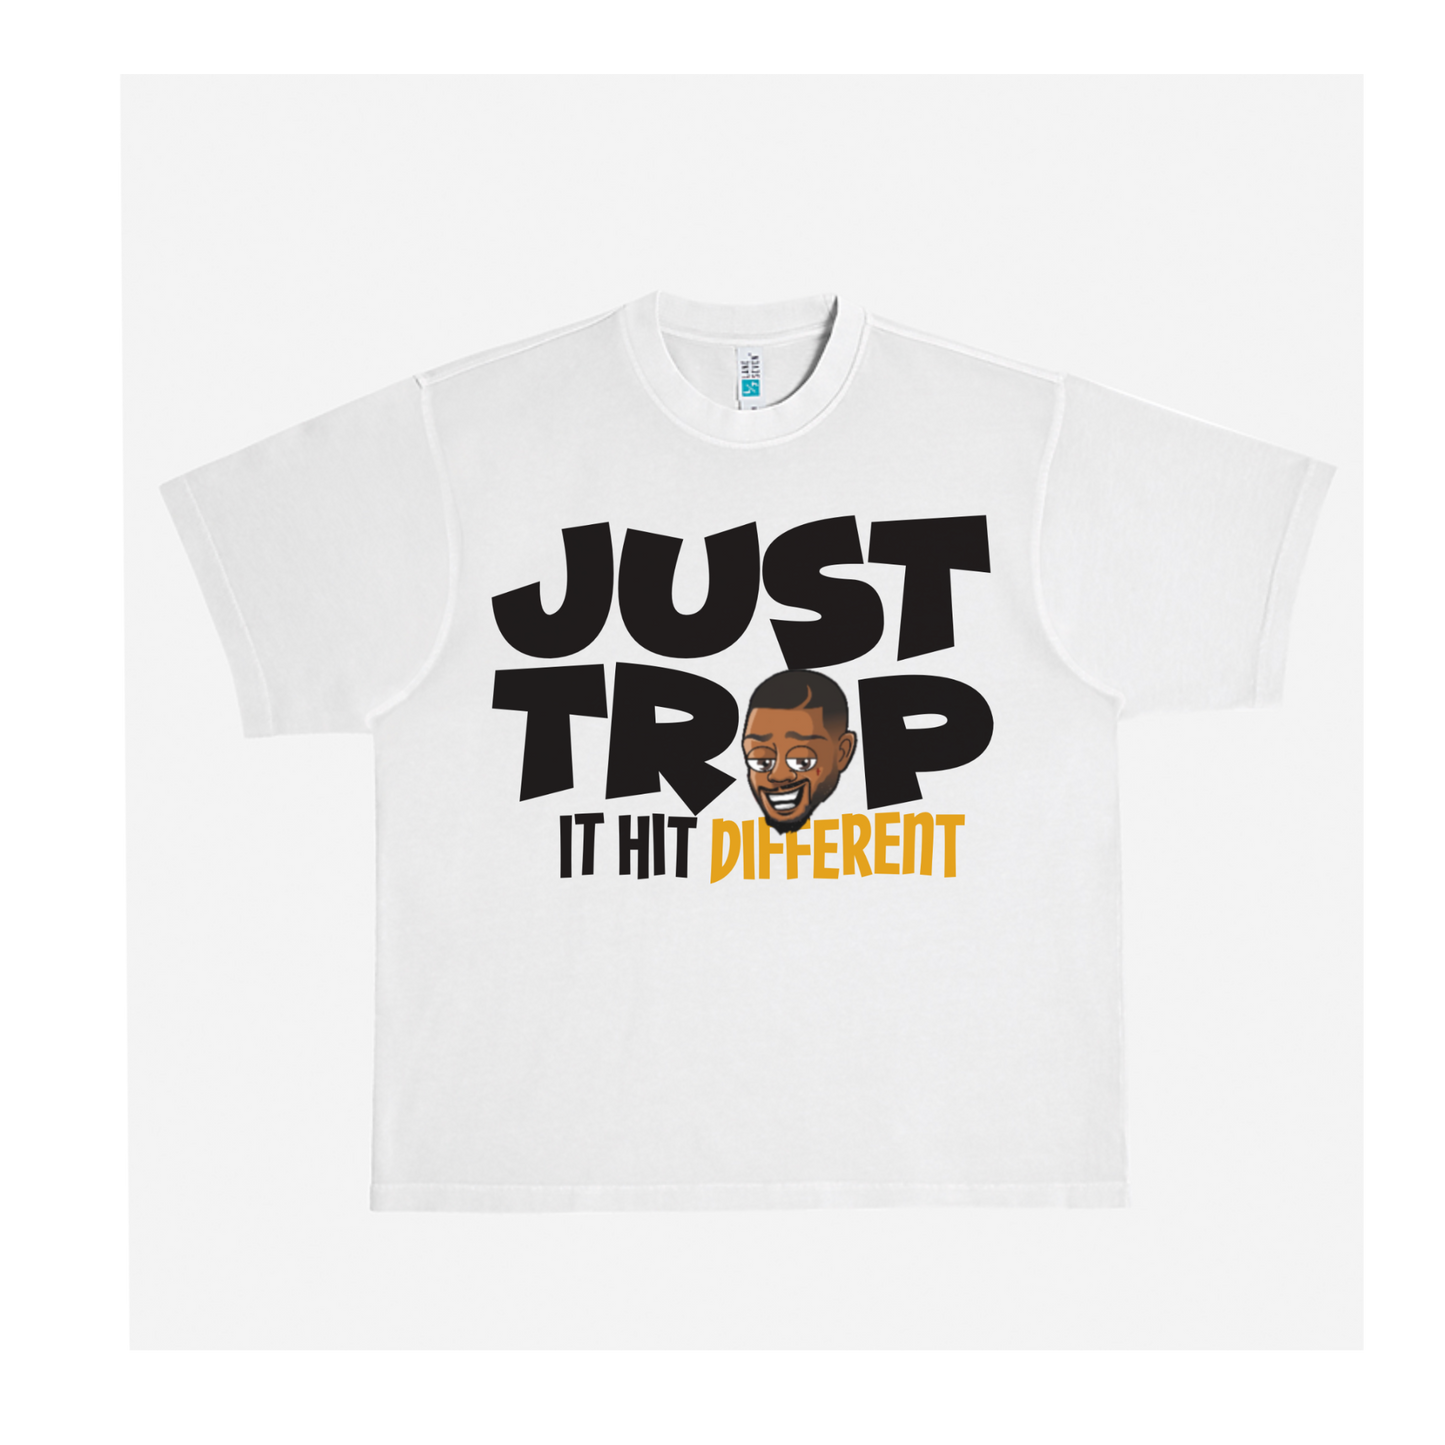 Just Trap It Hit Different Tee Shirt